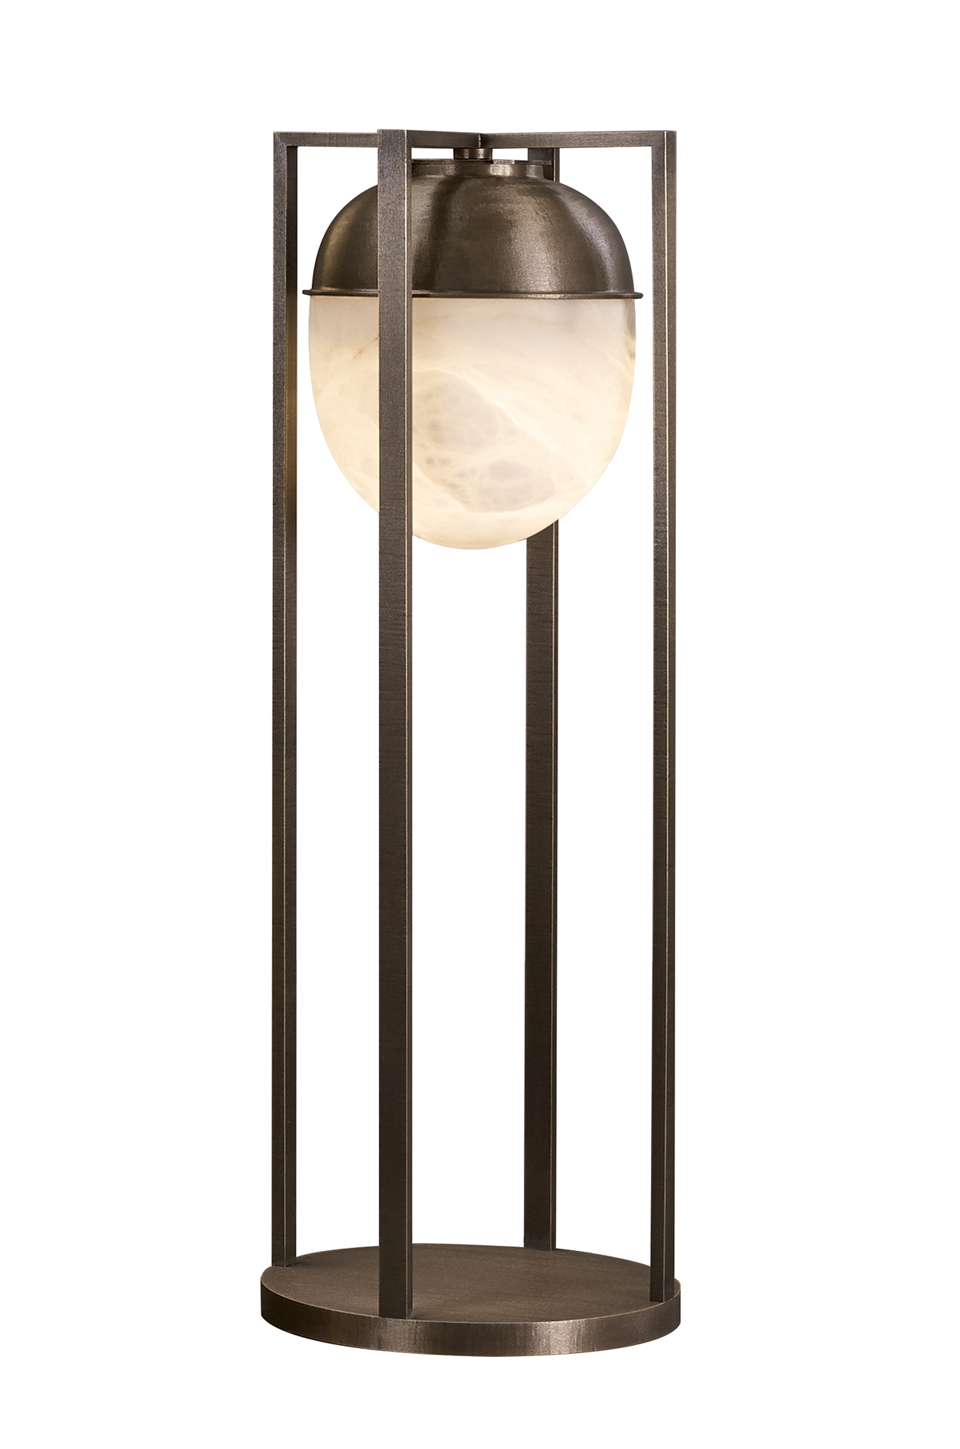 Jorinda is a floor LED lamp with bronze structure and alabaster lampshade, from Promemoria's catalogue | Promemoria